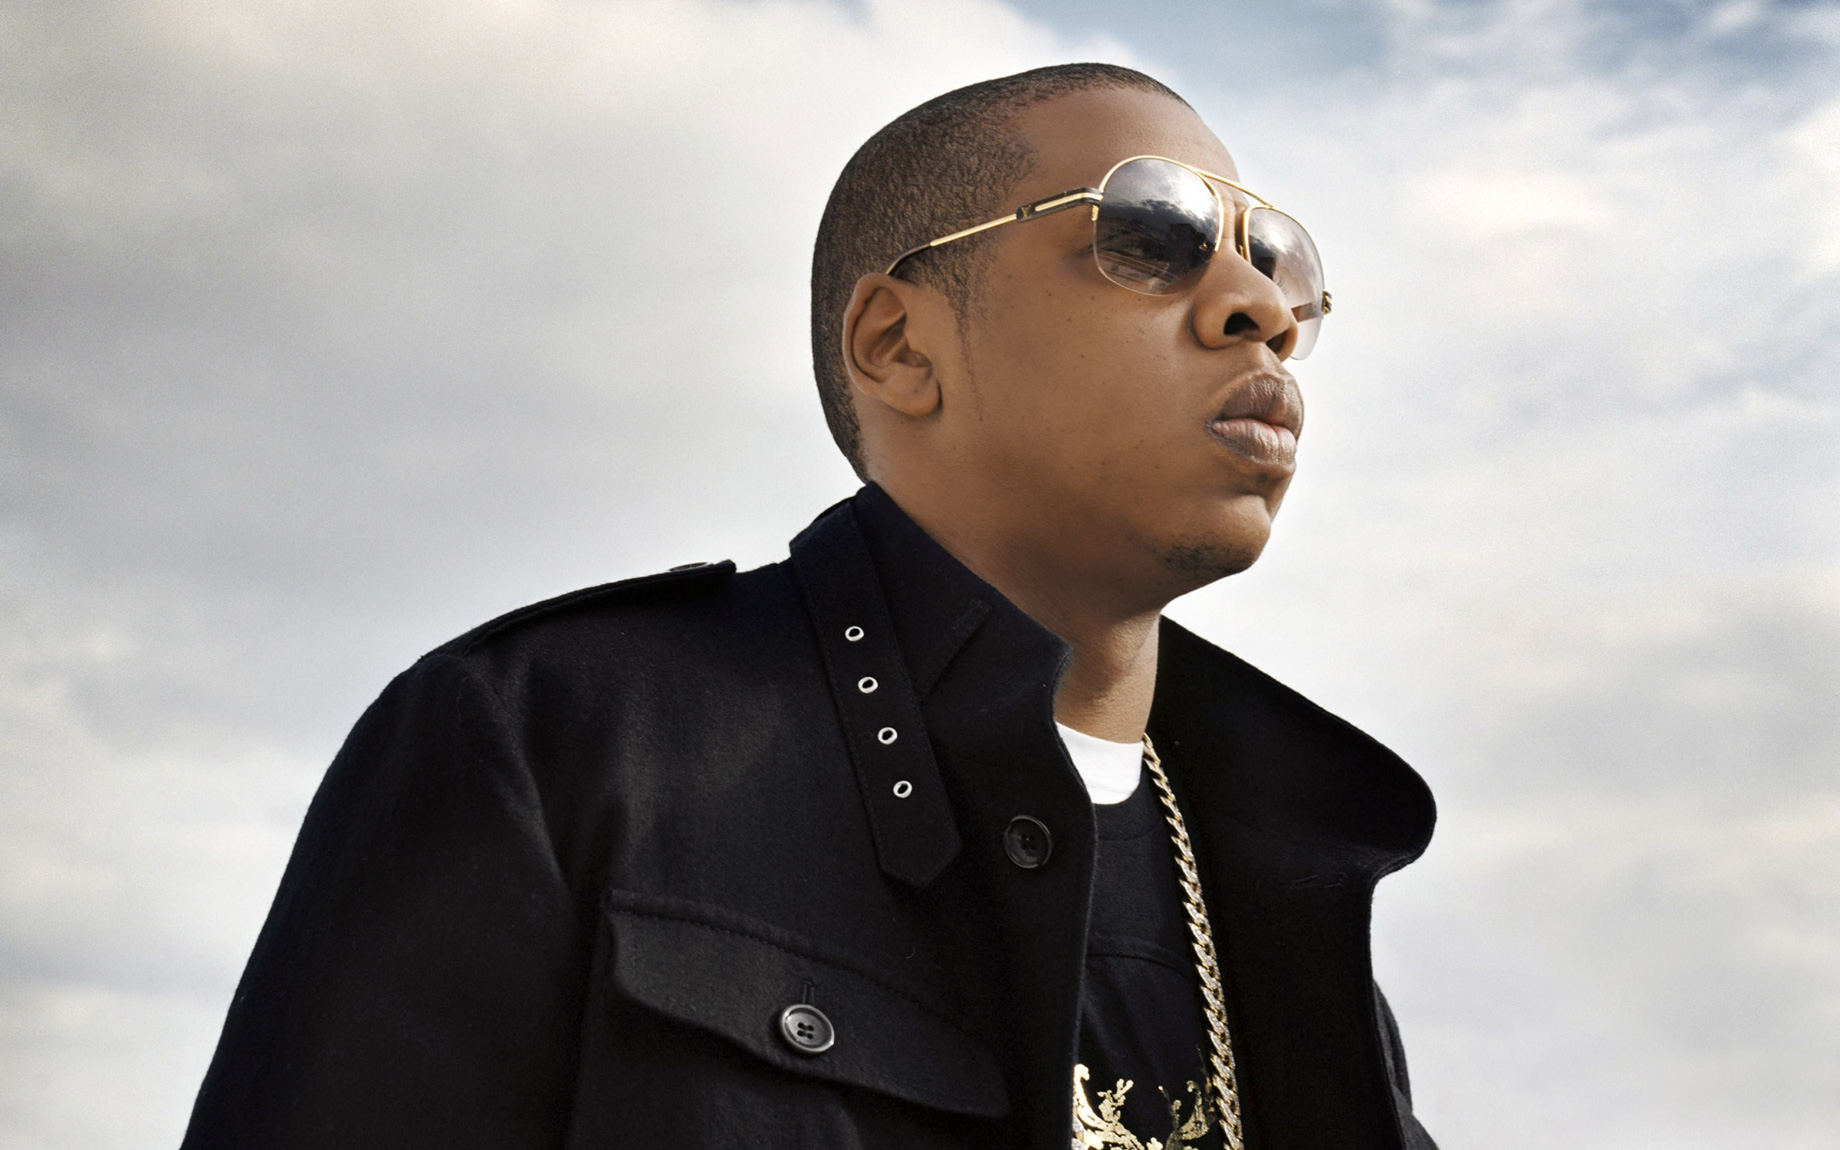 On its first anniversary, Tidal hits 3 million subscribers